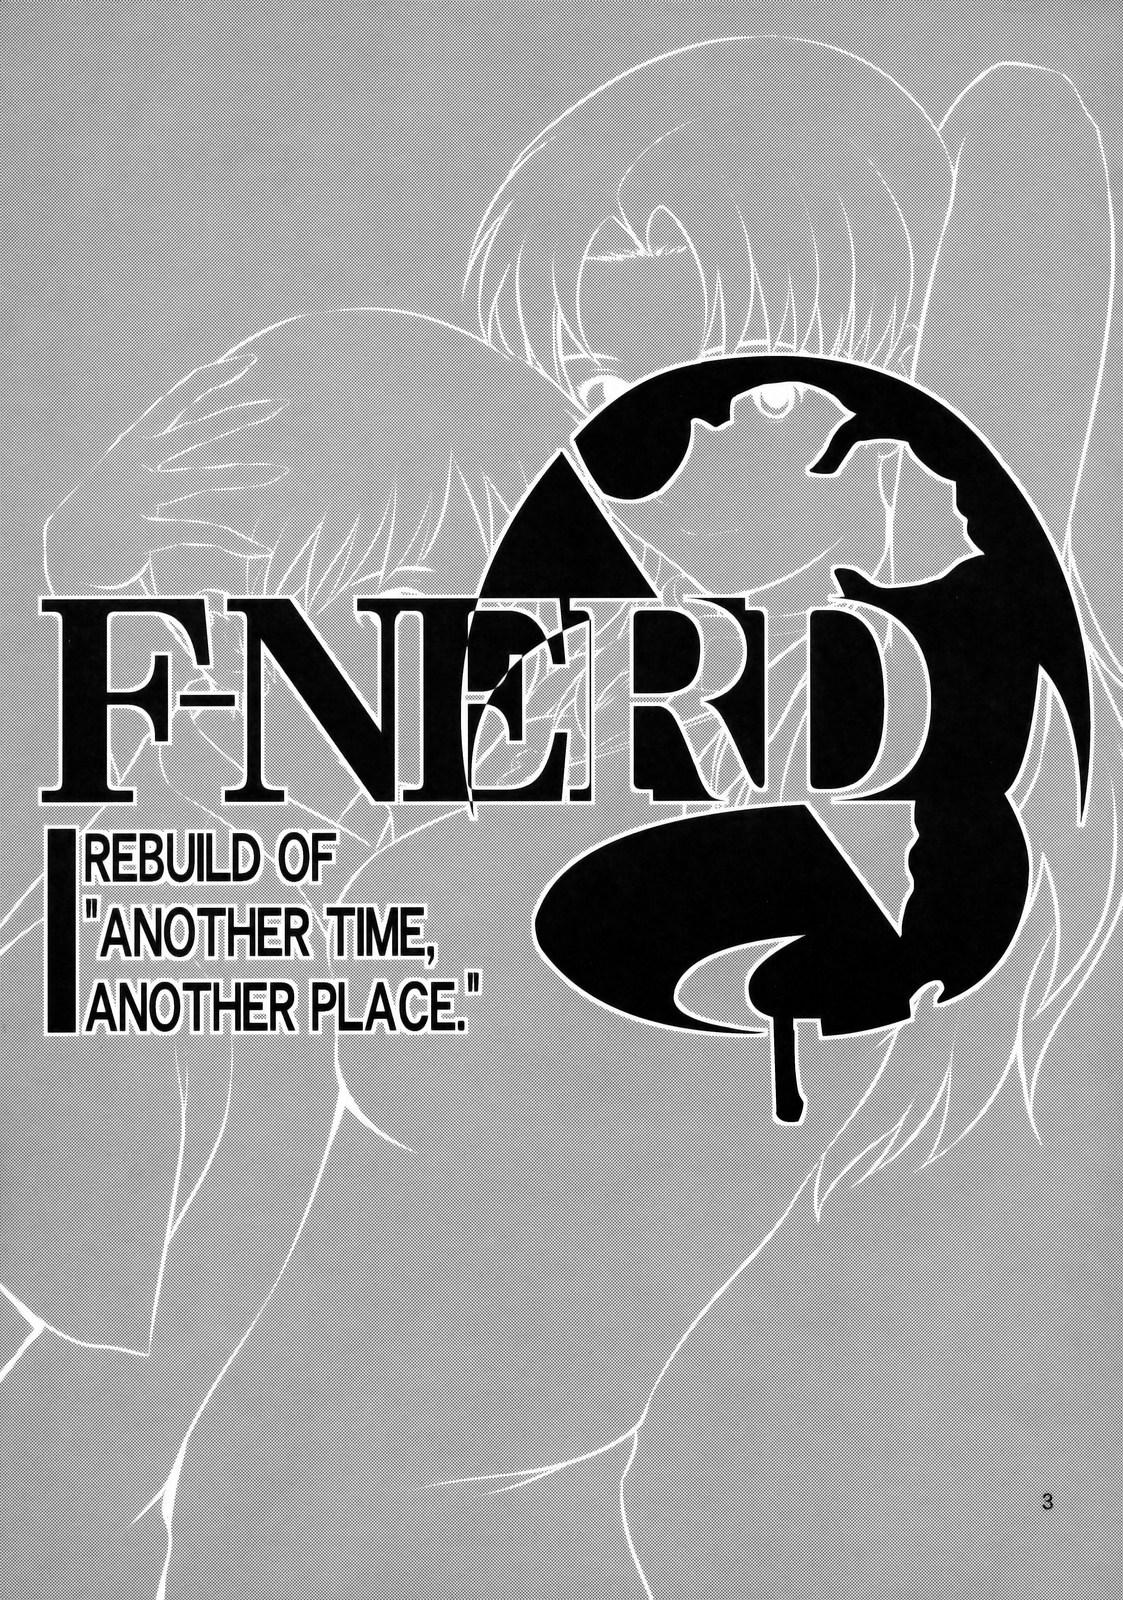 F-NERD Rebuild of "Another Time, Another Place." 2